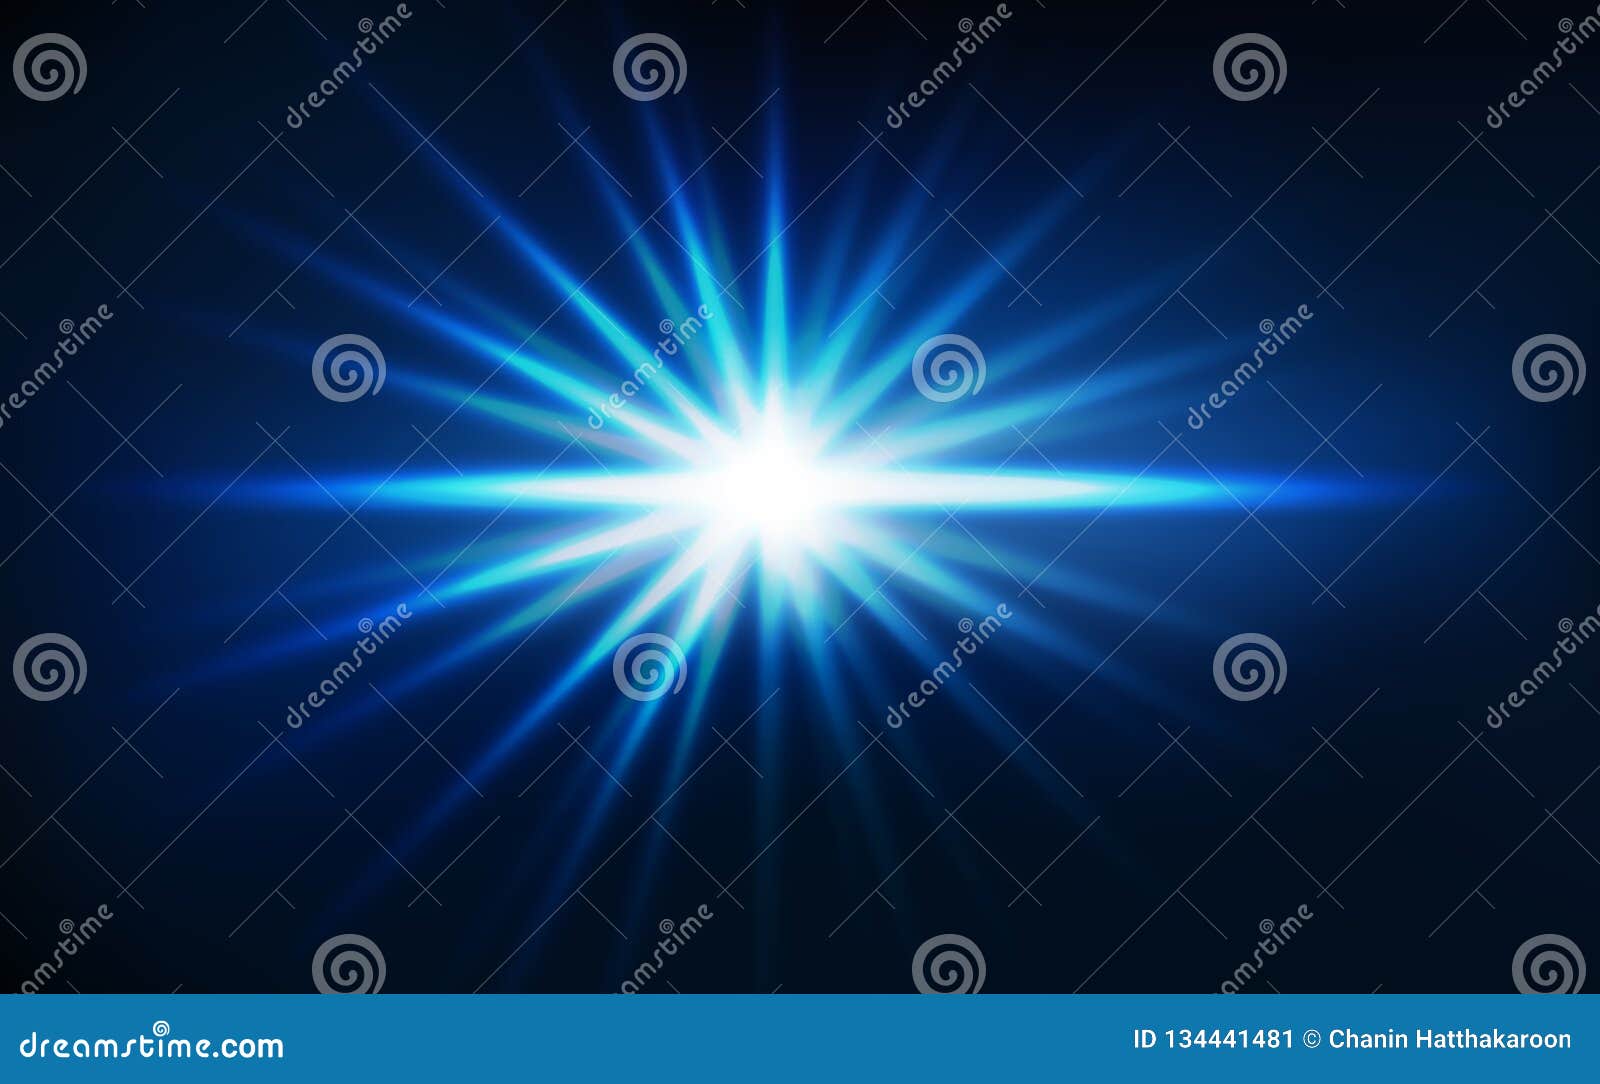 star burst, light rays effect blue concept abstract background  